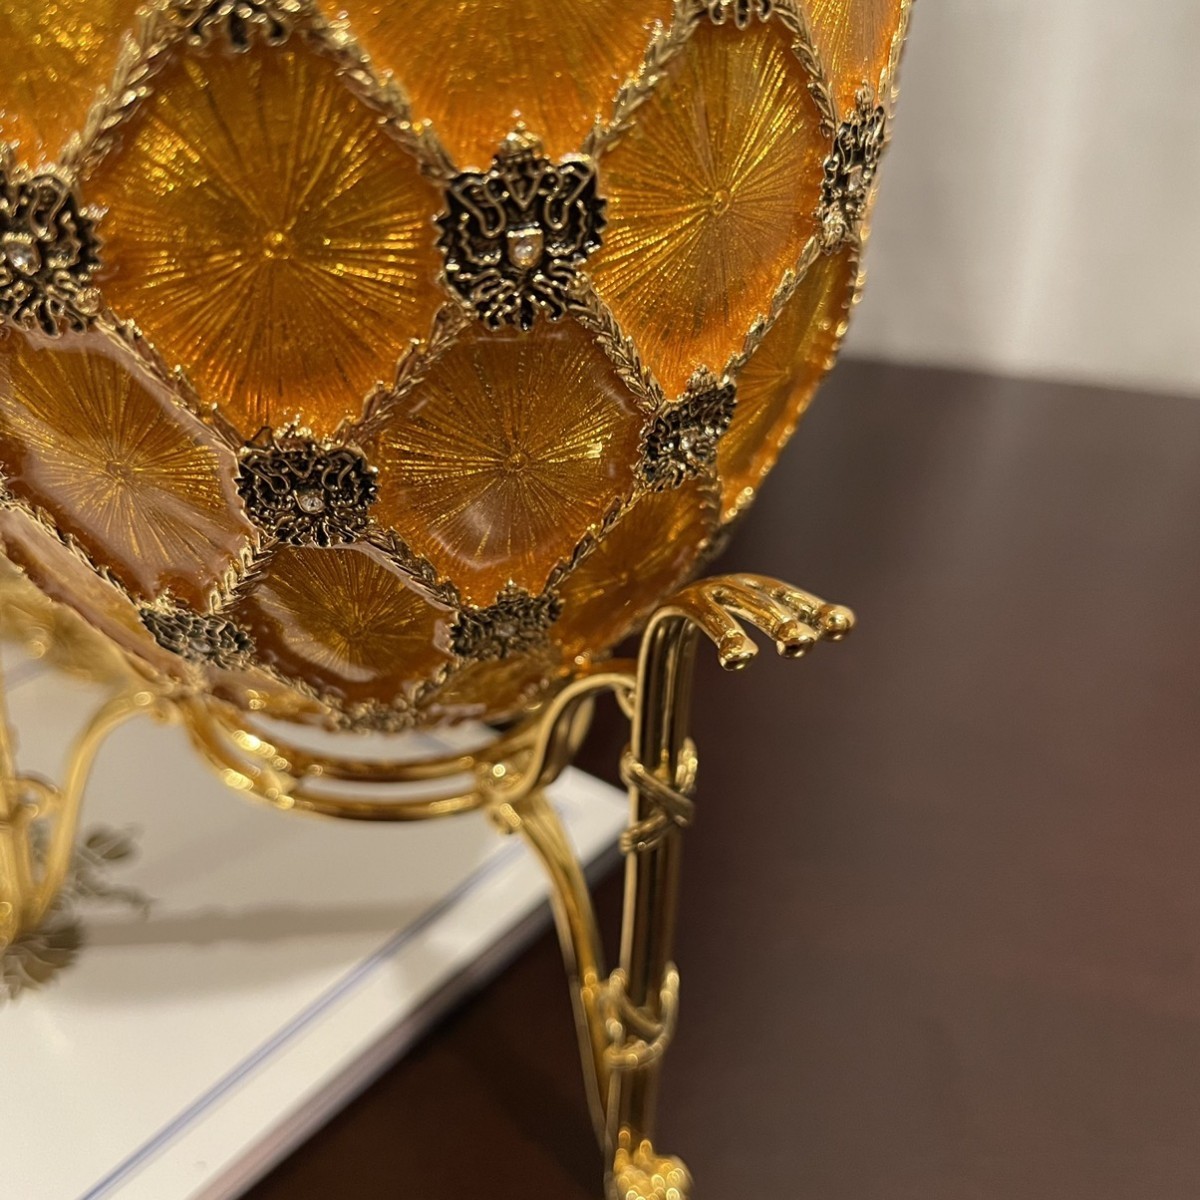 Jewelry - Faberge Imperial Coronation Egg {AUTHENTIC REPLICA} - 6